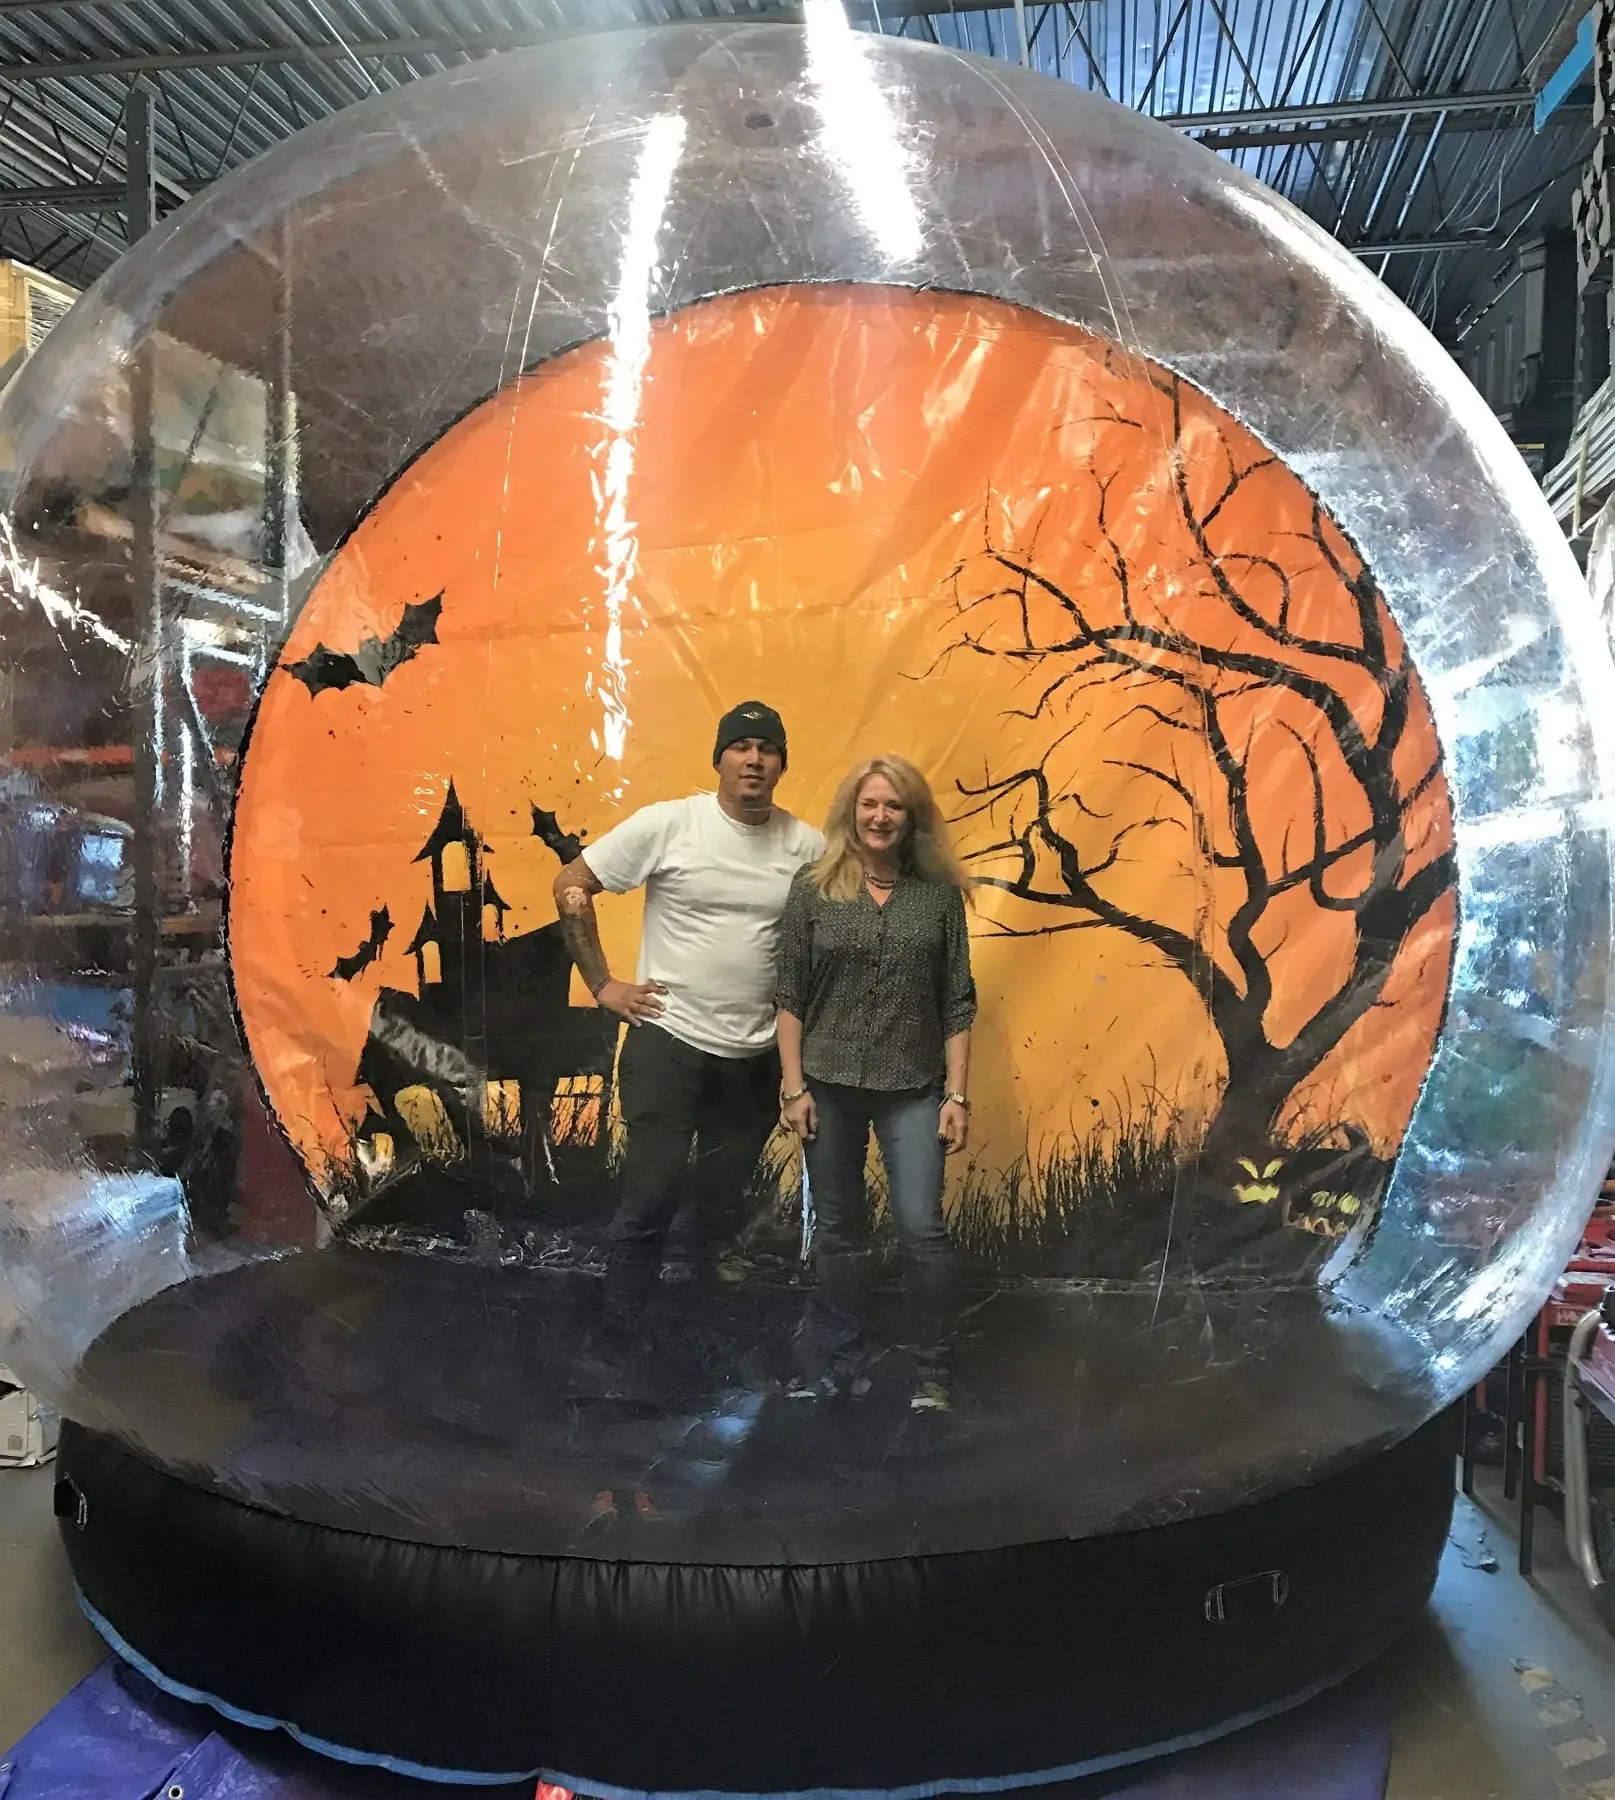 Free Shipping Free Air Pump Snow Globe Photo Booth For Human Giant Inflatable Snowglobe Christmas Halloween Decoration Bubble